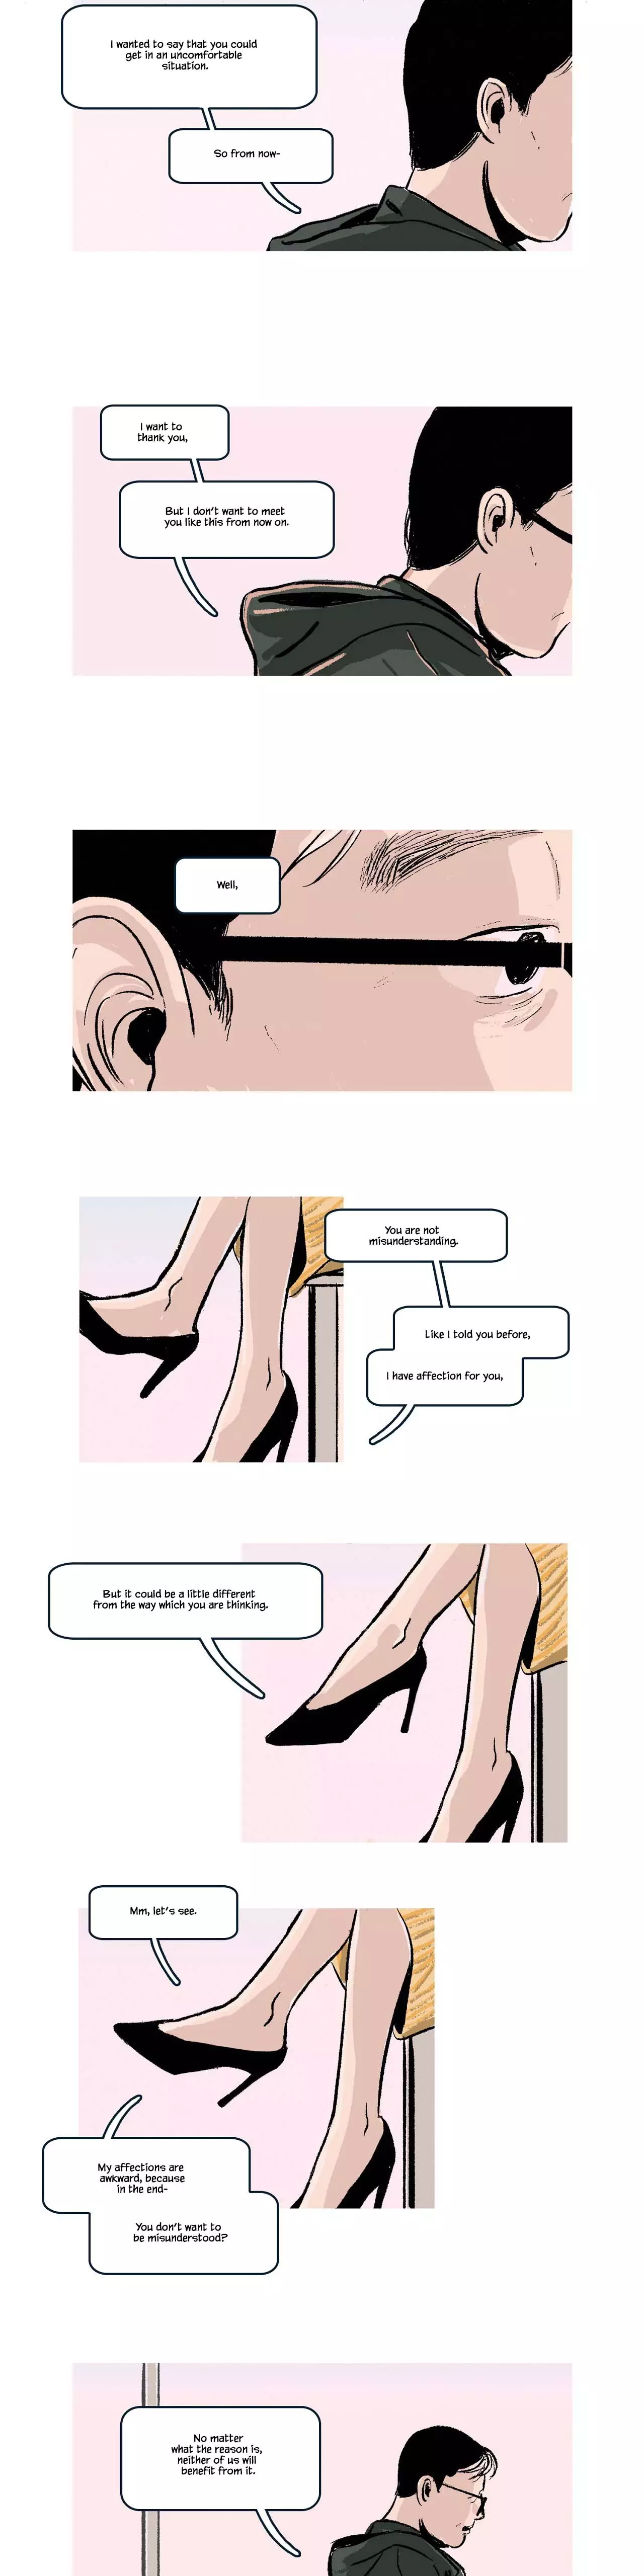 The Professor Who Reads Love Stories - 18 page 11-6f410dde